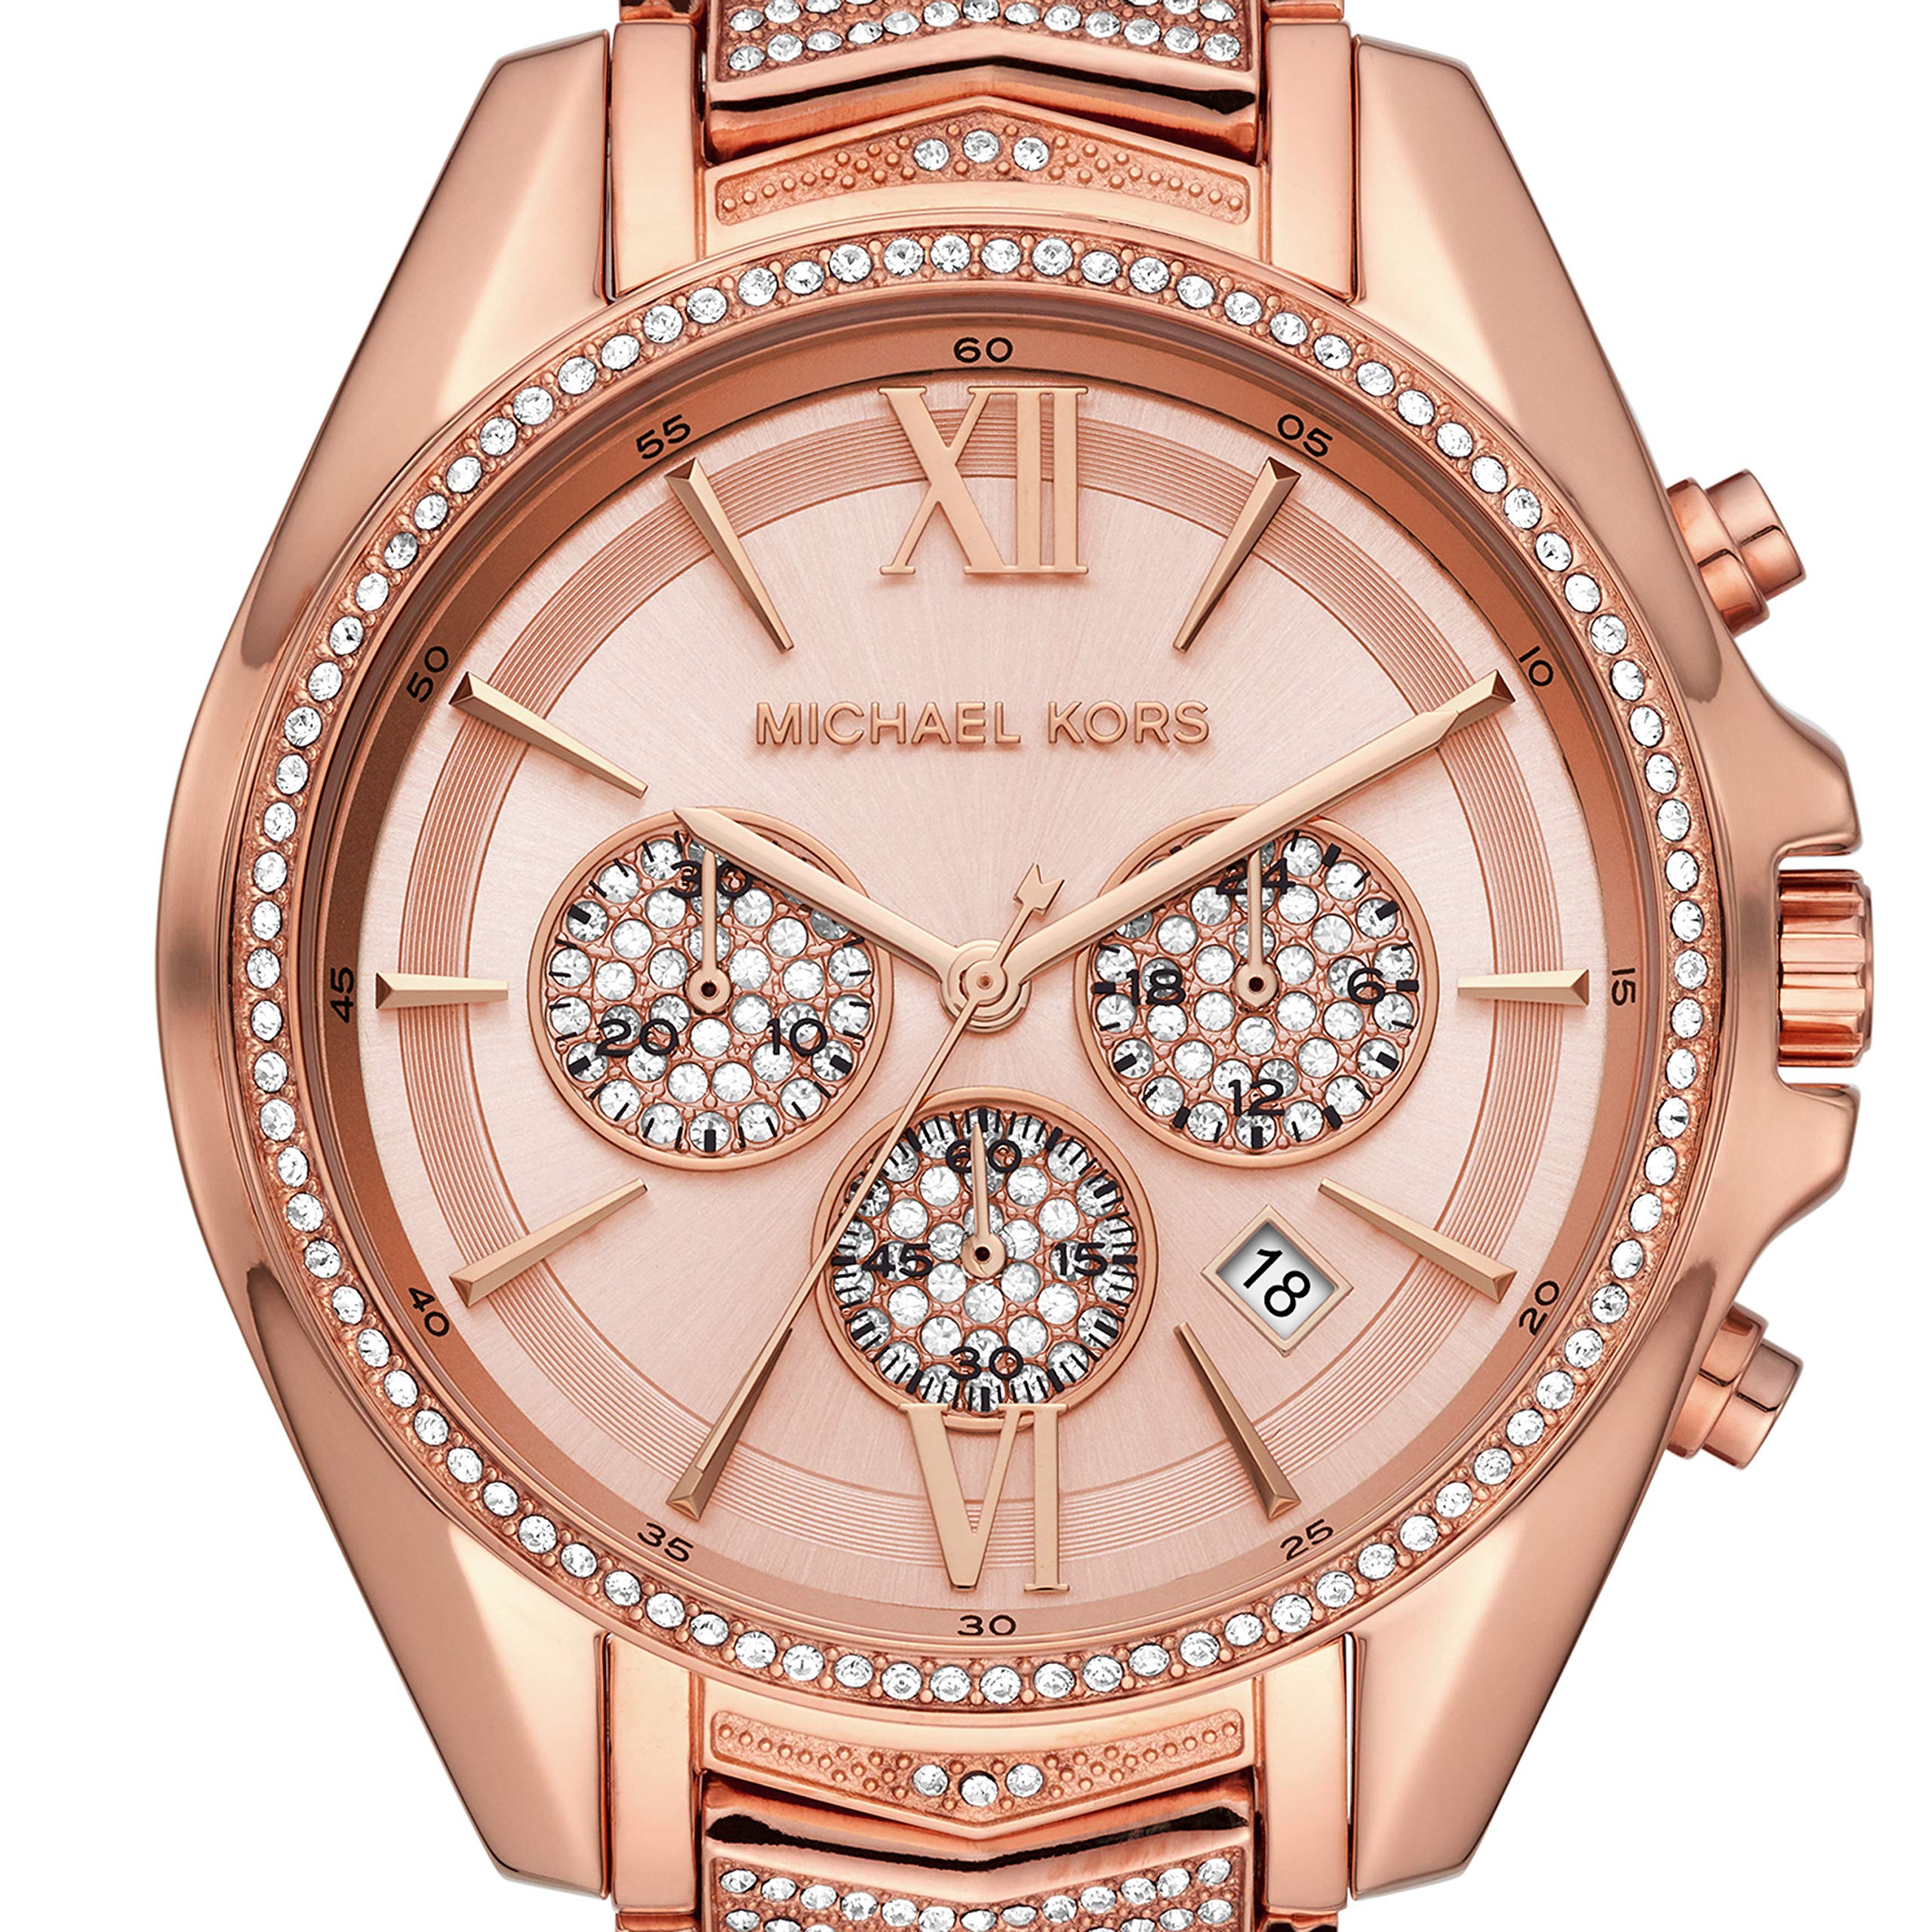 Michael Kors Whitney Stainless Steel Watch With Glitz Accents